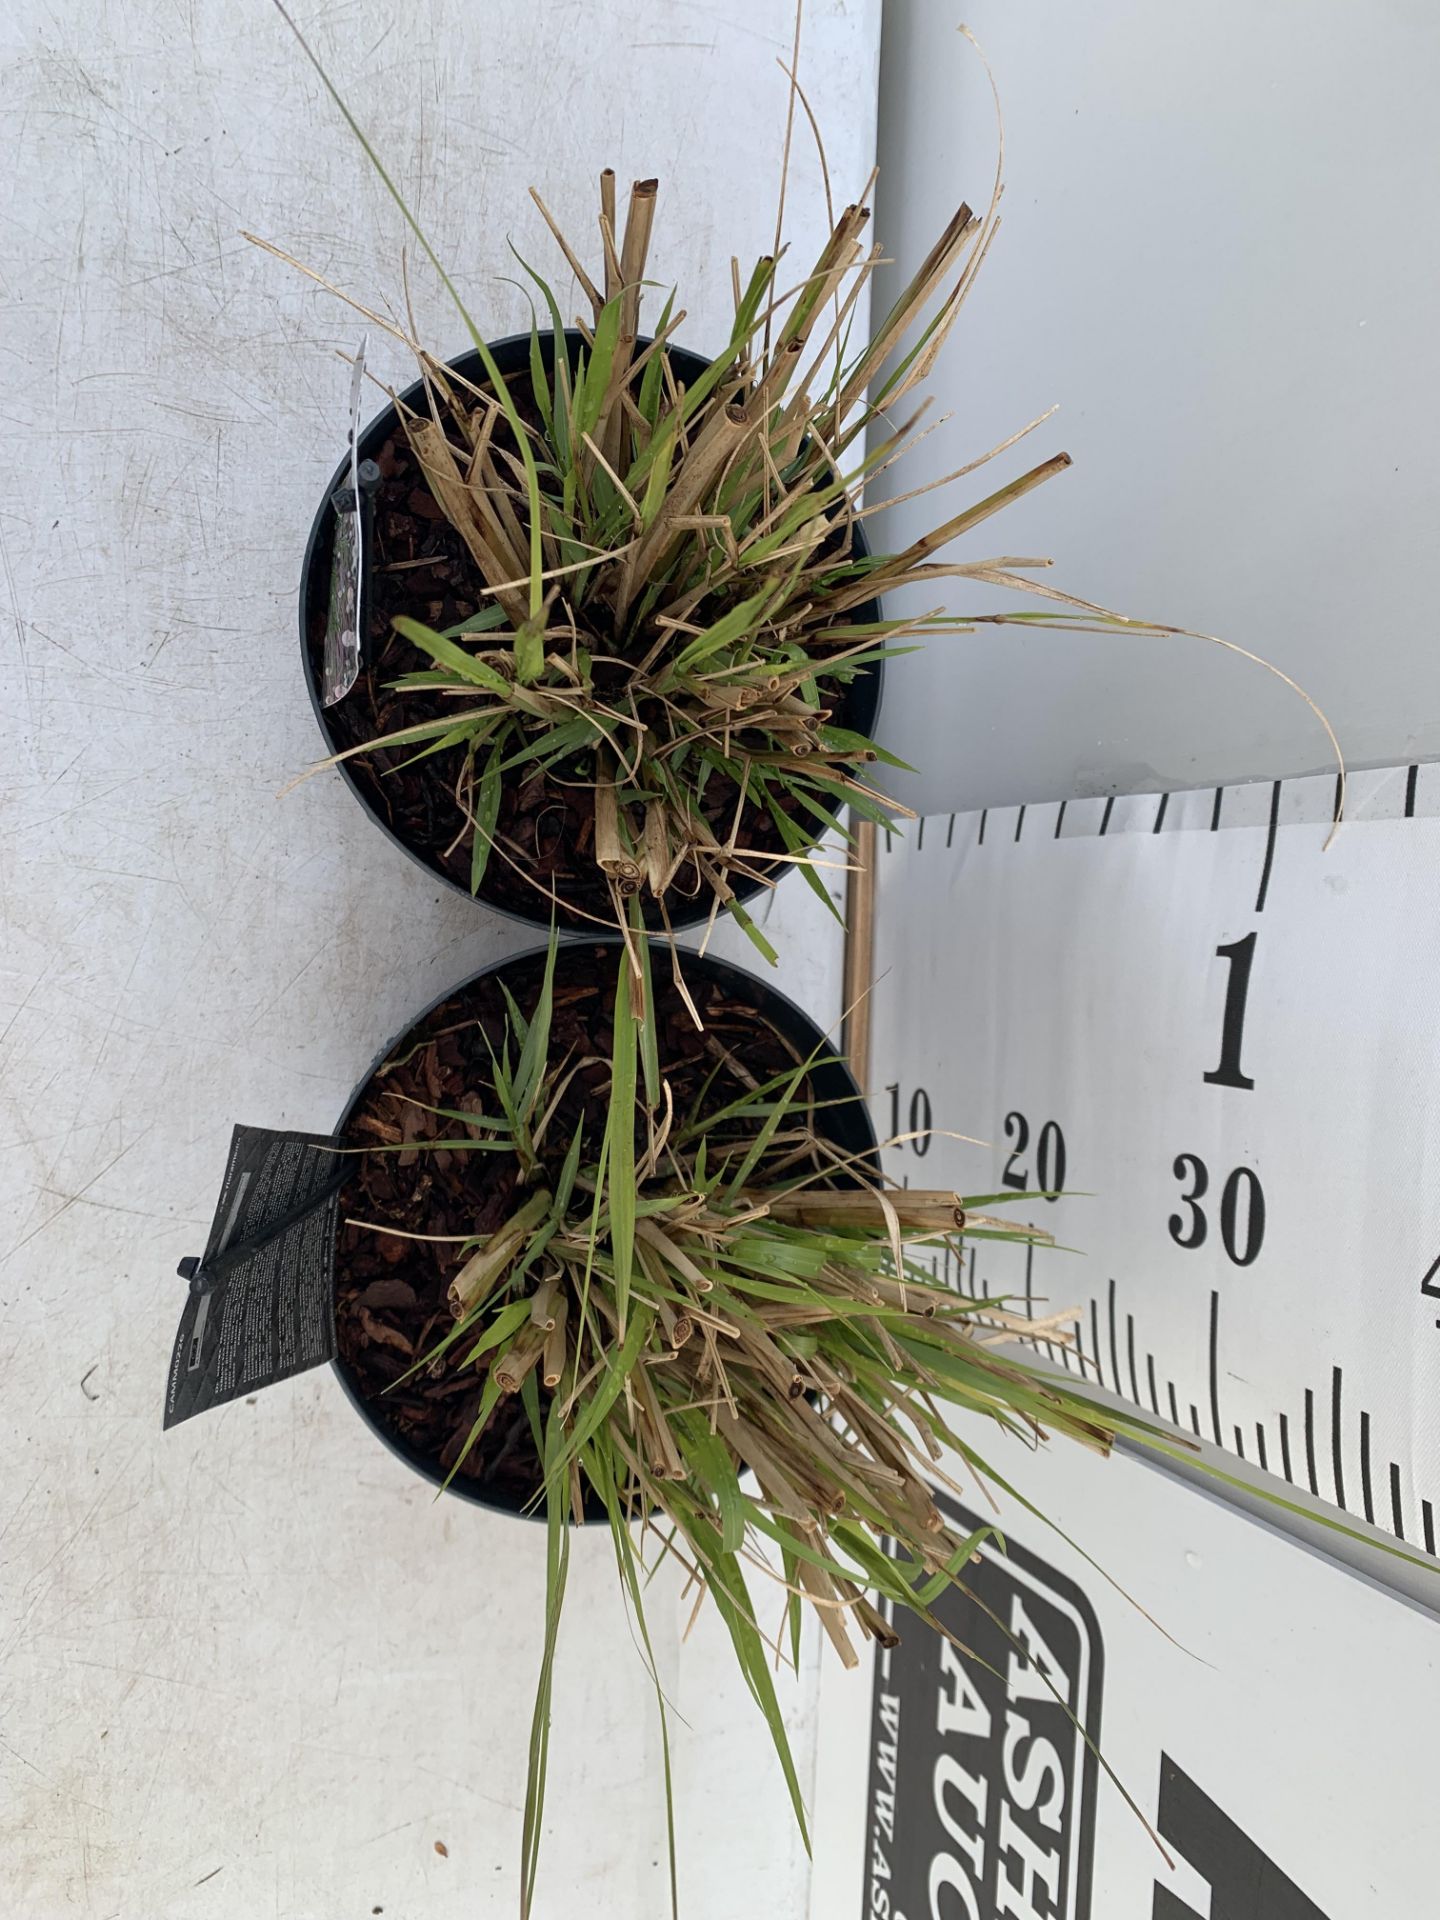 TWO ORNAMENTAL GRASSES PENNISETUM 'REDHEAD' IN 4 LTR POTS APPROX 60CM IN HEIGHT PLUS VAT TO BE - Image 3 of 8